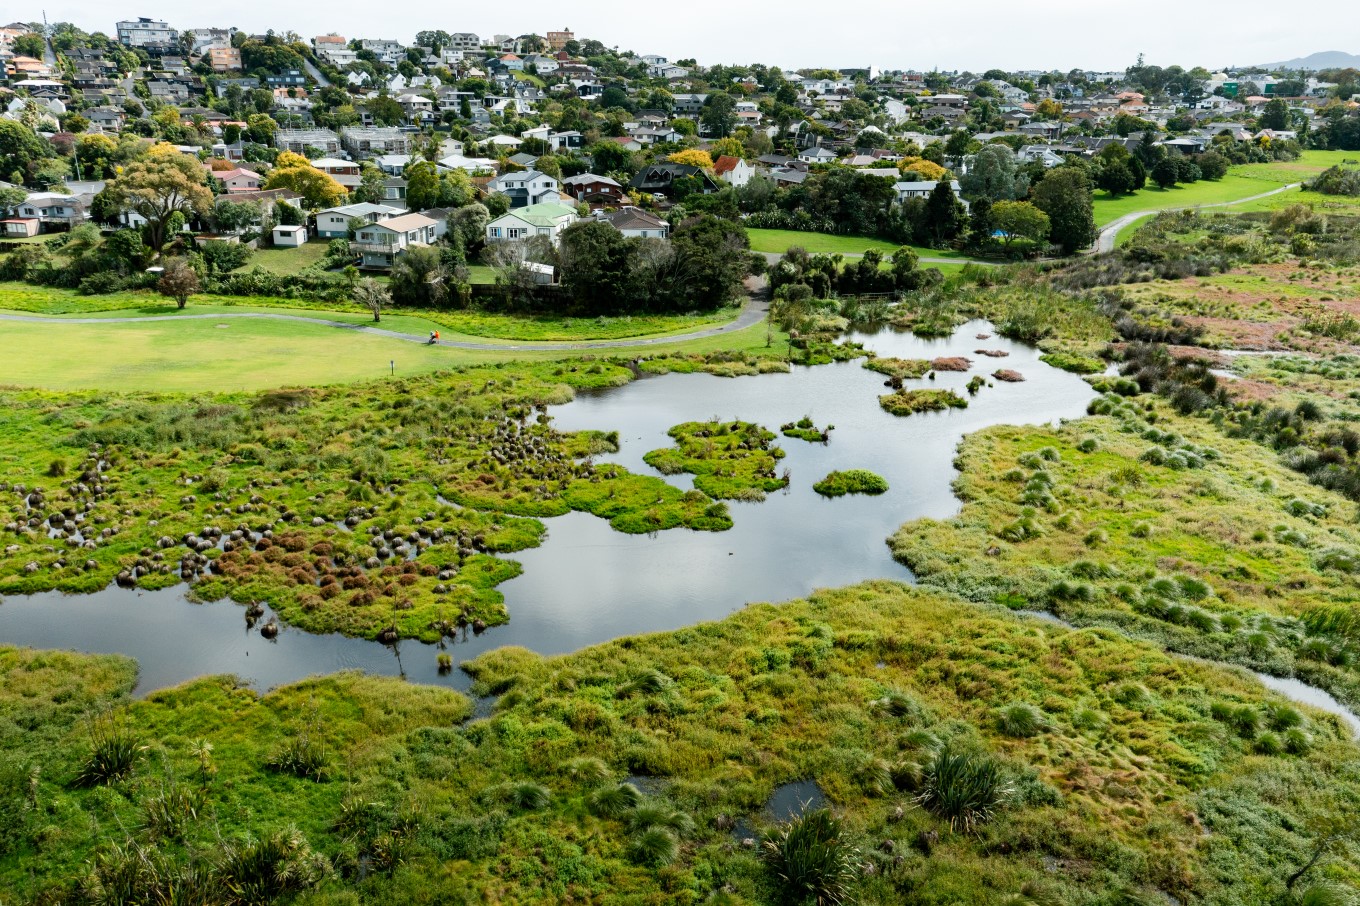 Waiatarua Reserve in Remuera is Auckland's biggest wetland restoration project. The constructed wetland helps filter stormwater.